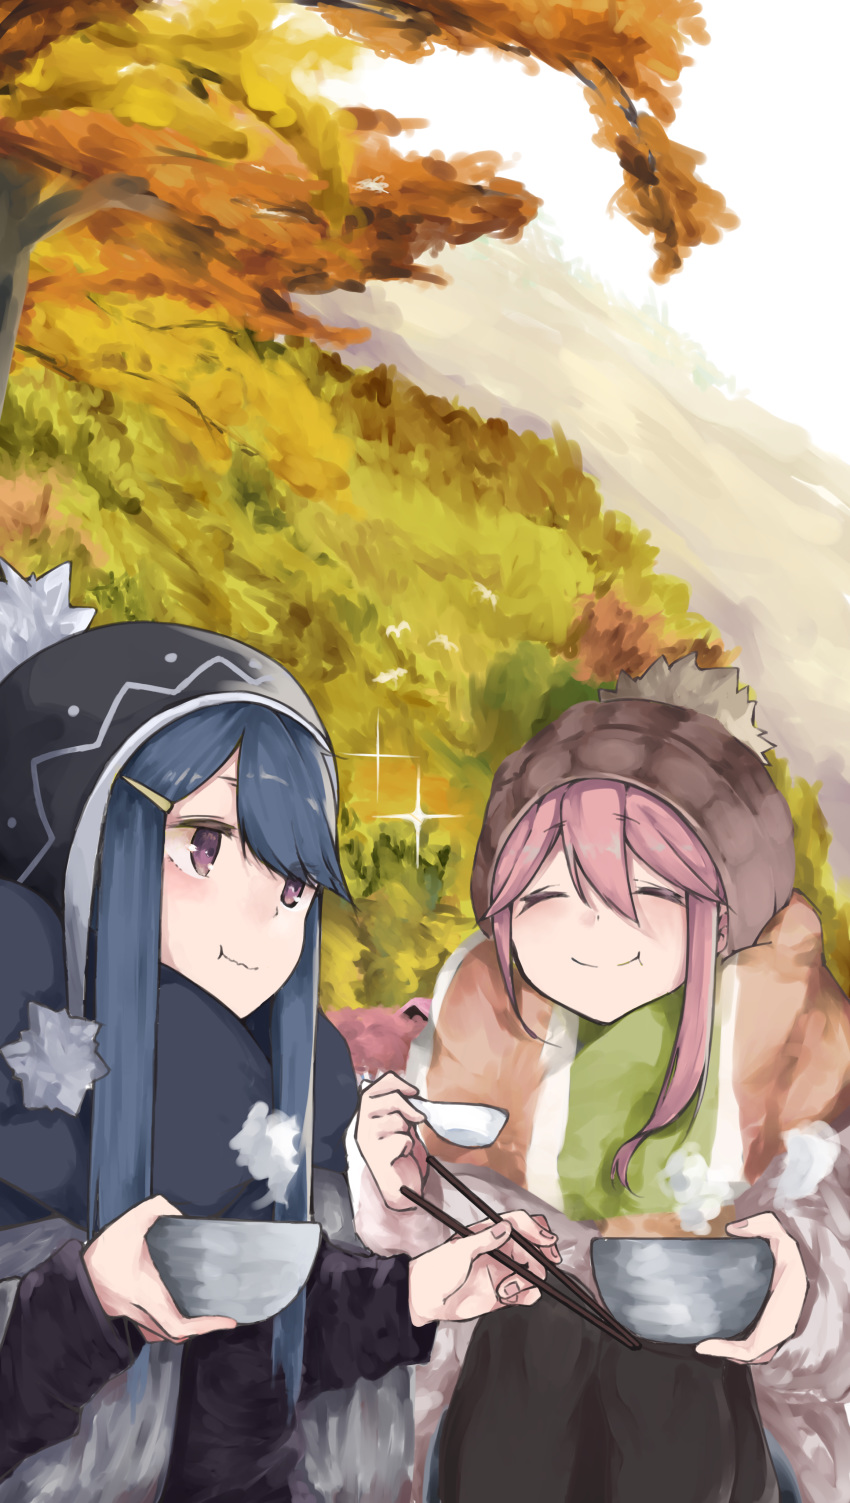 2girls :t absurdres autumn_leaves blue_hair bowl chopsticks closed_eyes commentary eating hat highres holding holding_bowl holding_chopsticks kagamihara_nadeshiko leadin_the_sky multiple_girls outdoors pink_hair purple_eyes scarf shima_rin smile winter_clothes yurucamp